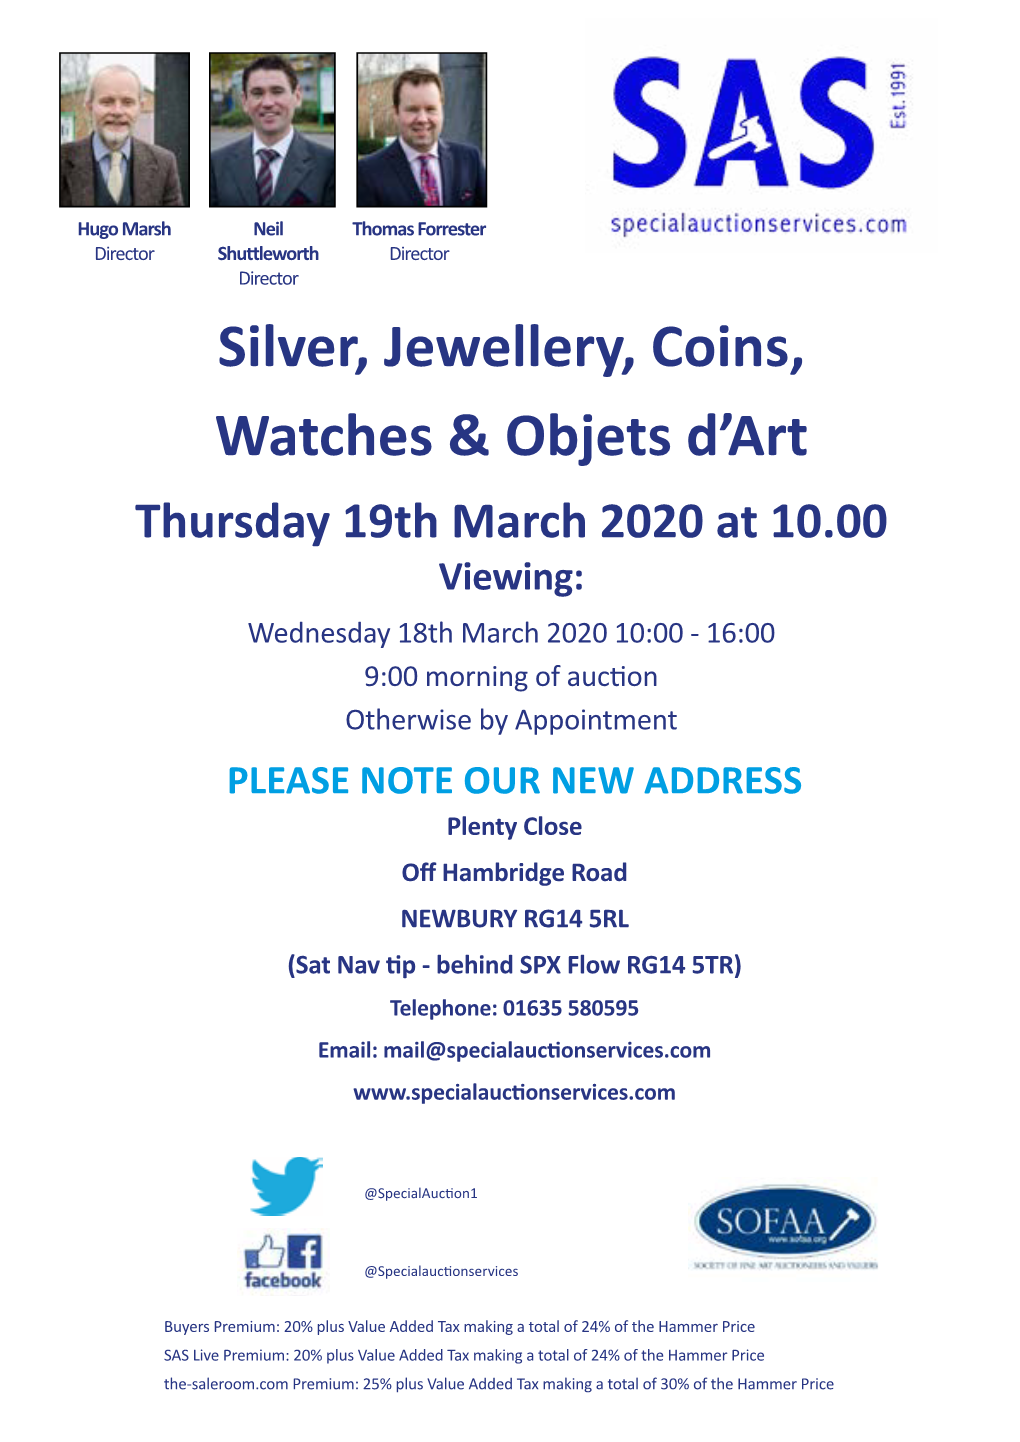 Silver, Jewellery, Coins, Watches & Objets D'art